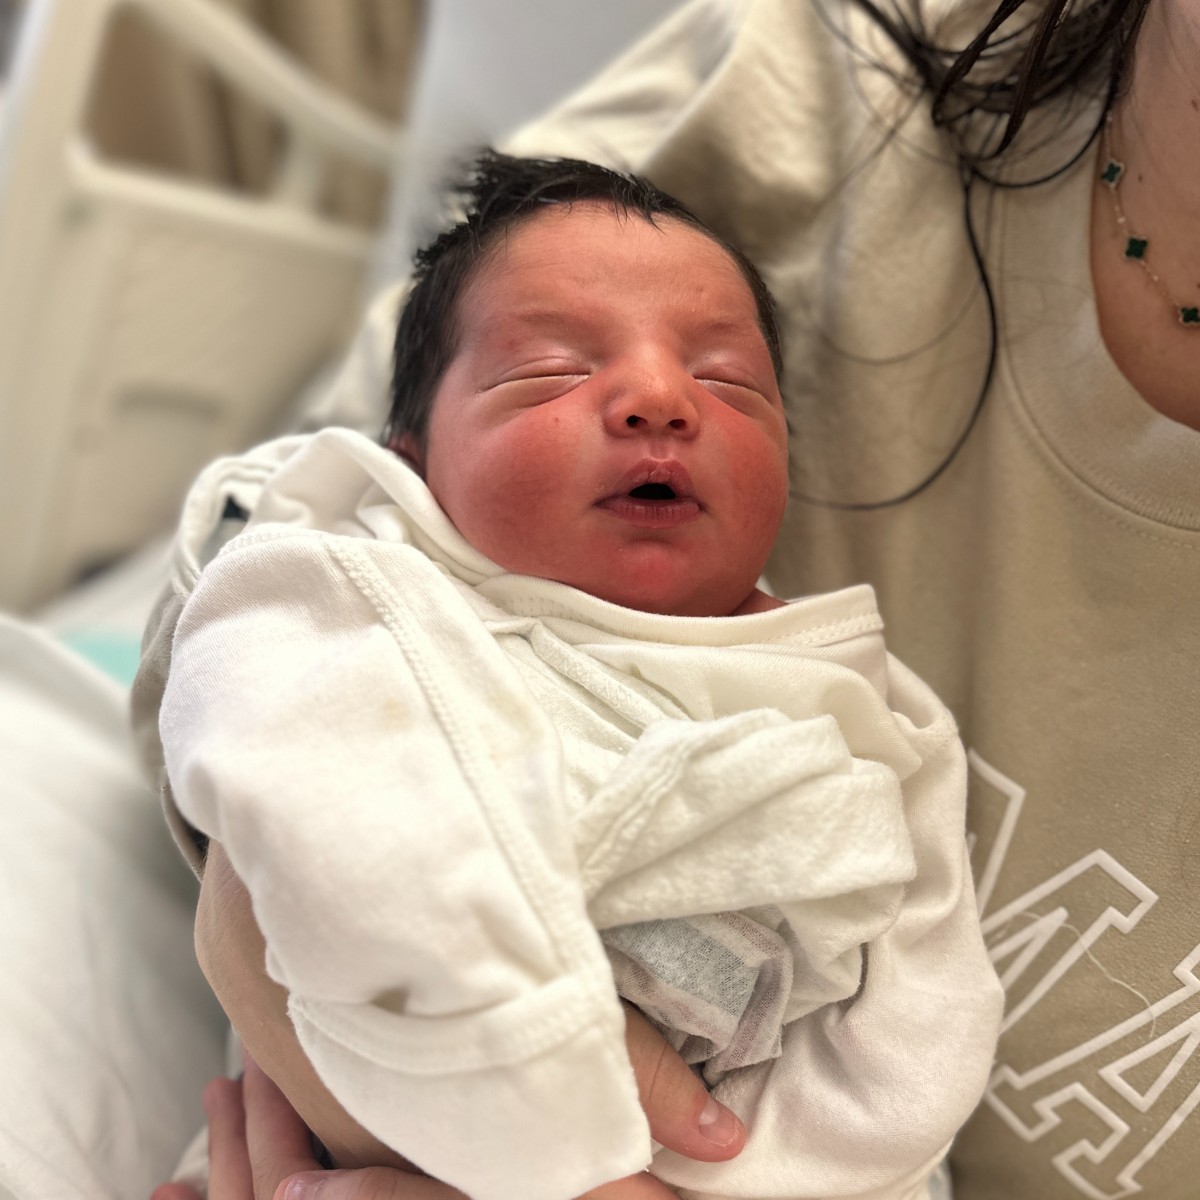 Happy Mother’s Day! 💐 Congratulations to all of the new moms who welcomed their babies at White Plains Hospital over the past year, including first-time mom Emily and her husband Danny, who recently welcomed baby Liam!